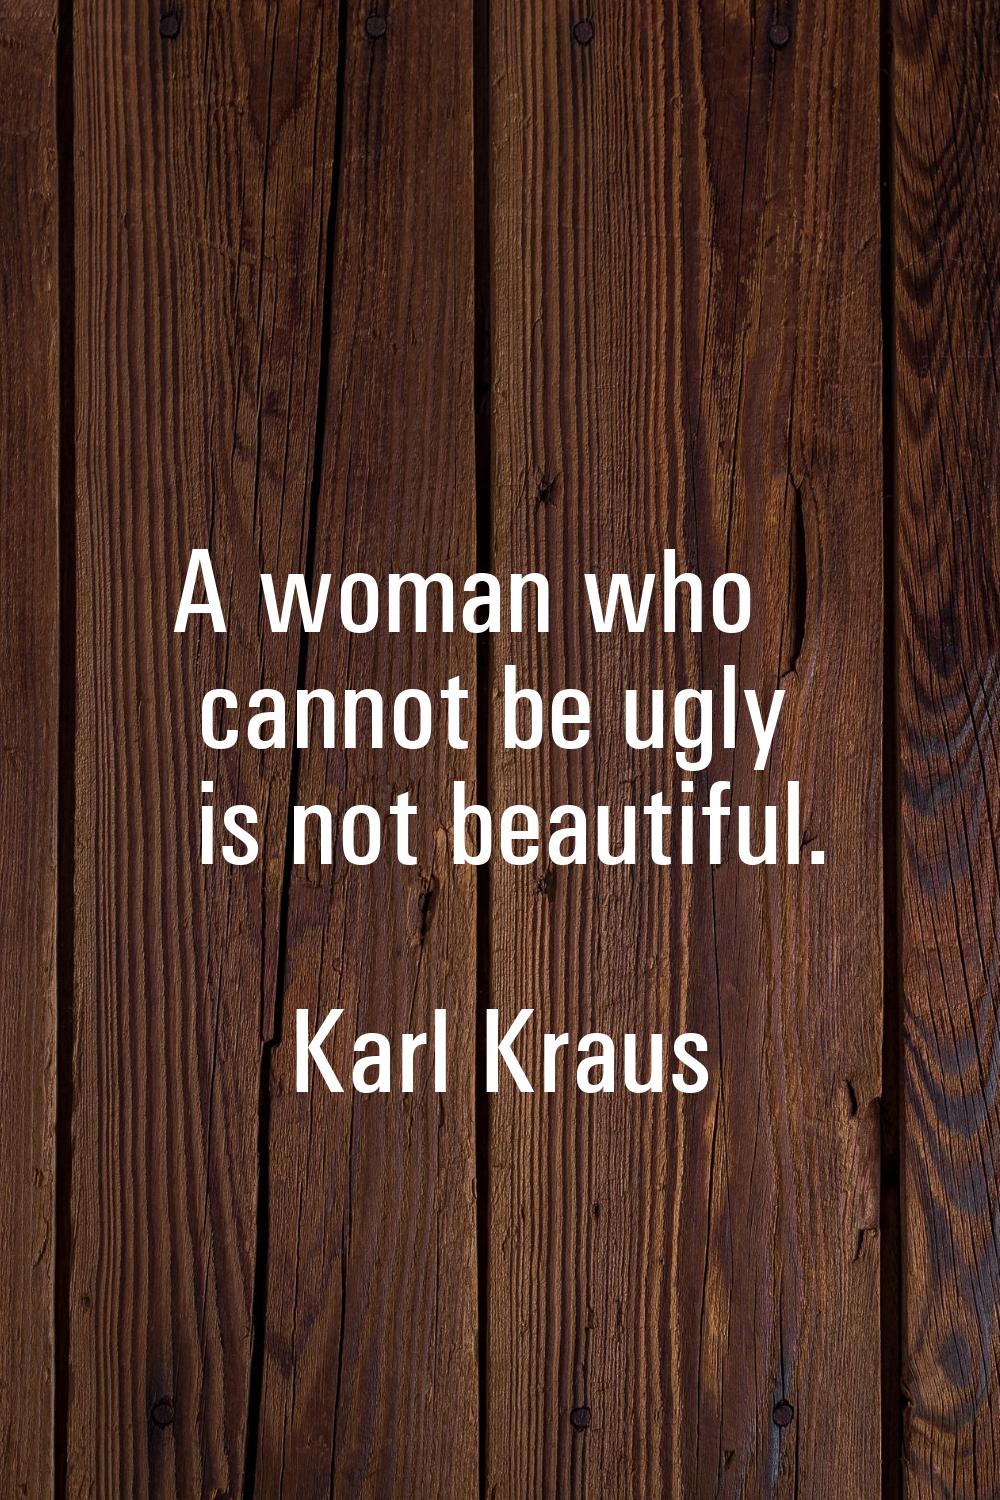 A woman who cannot be ugly is not beautiful.